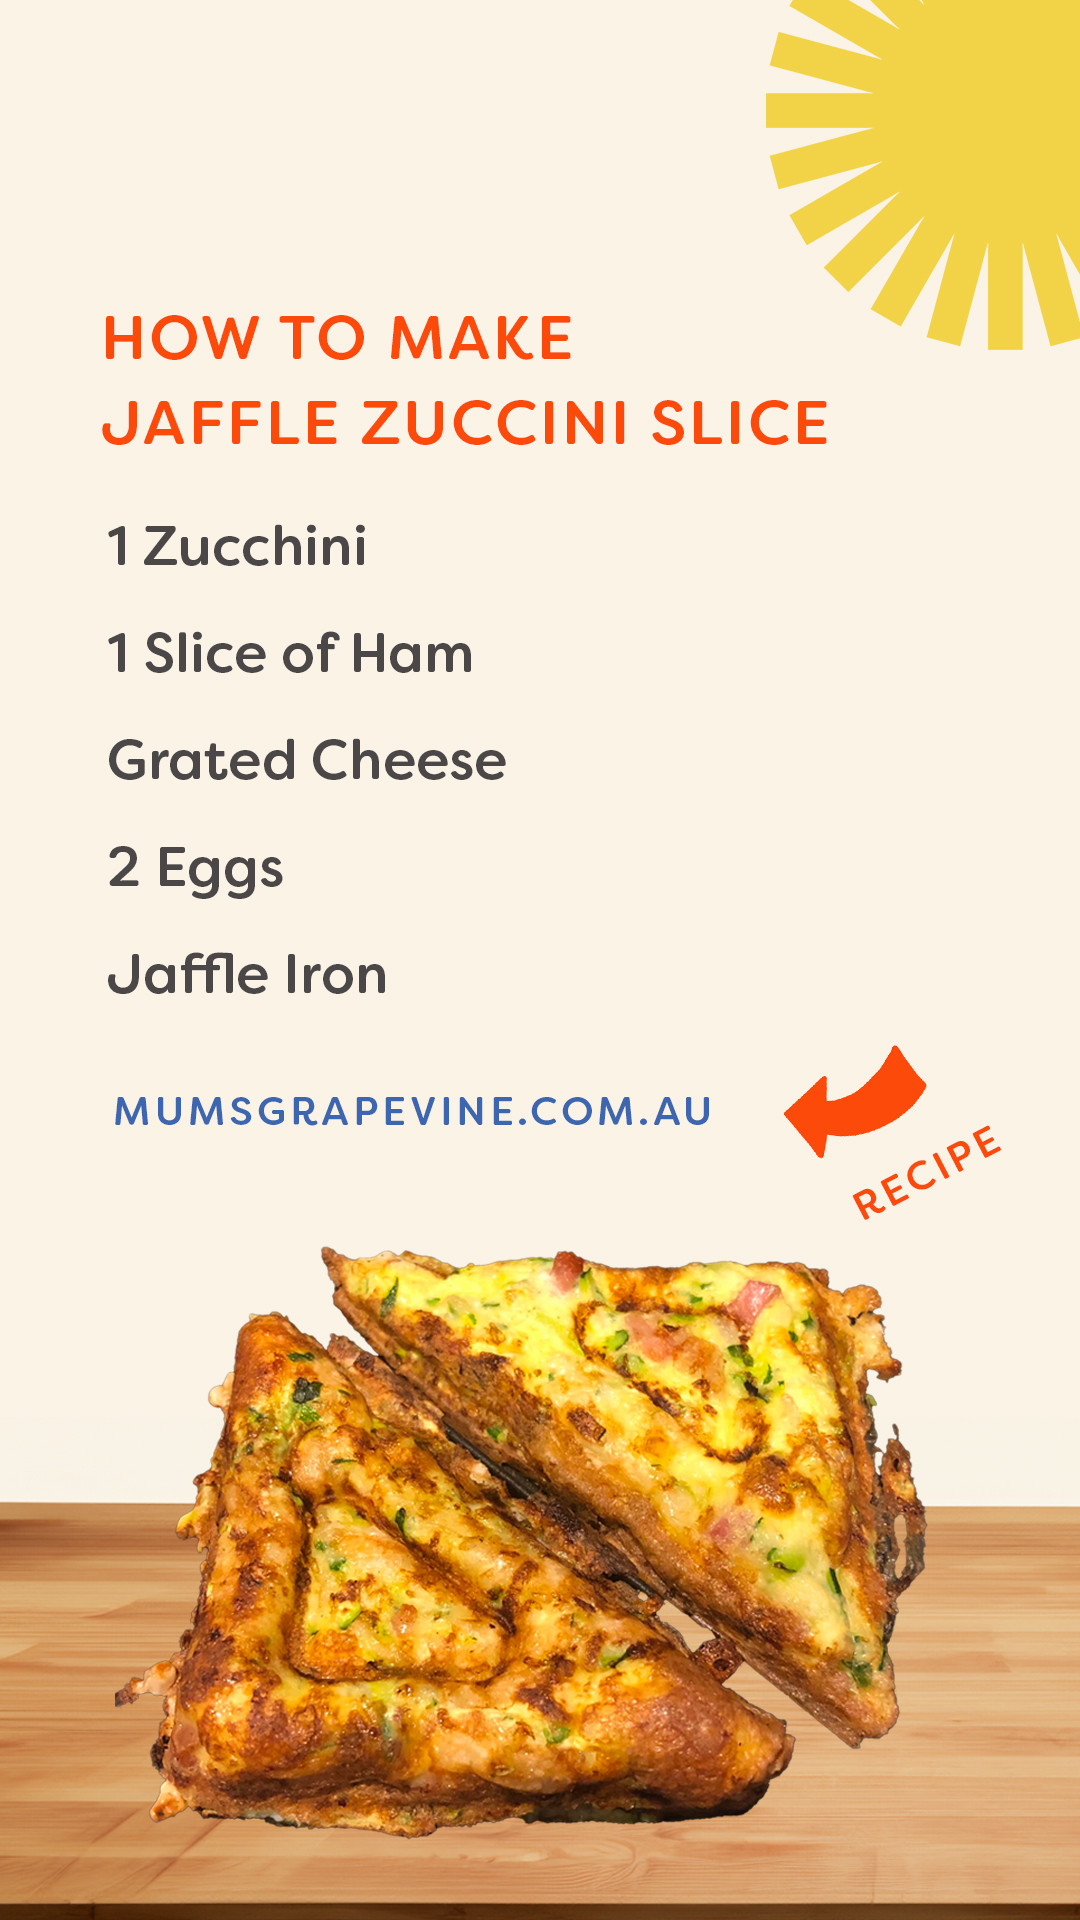 Ingredients listed to make Jaffle Zucchini Slice